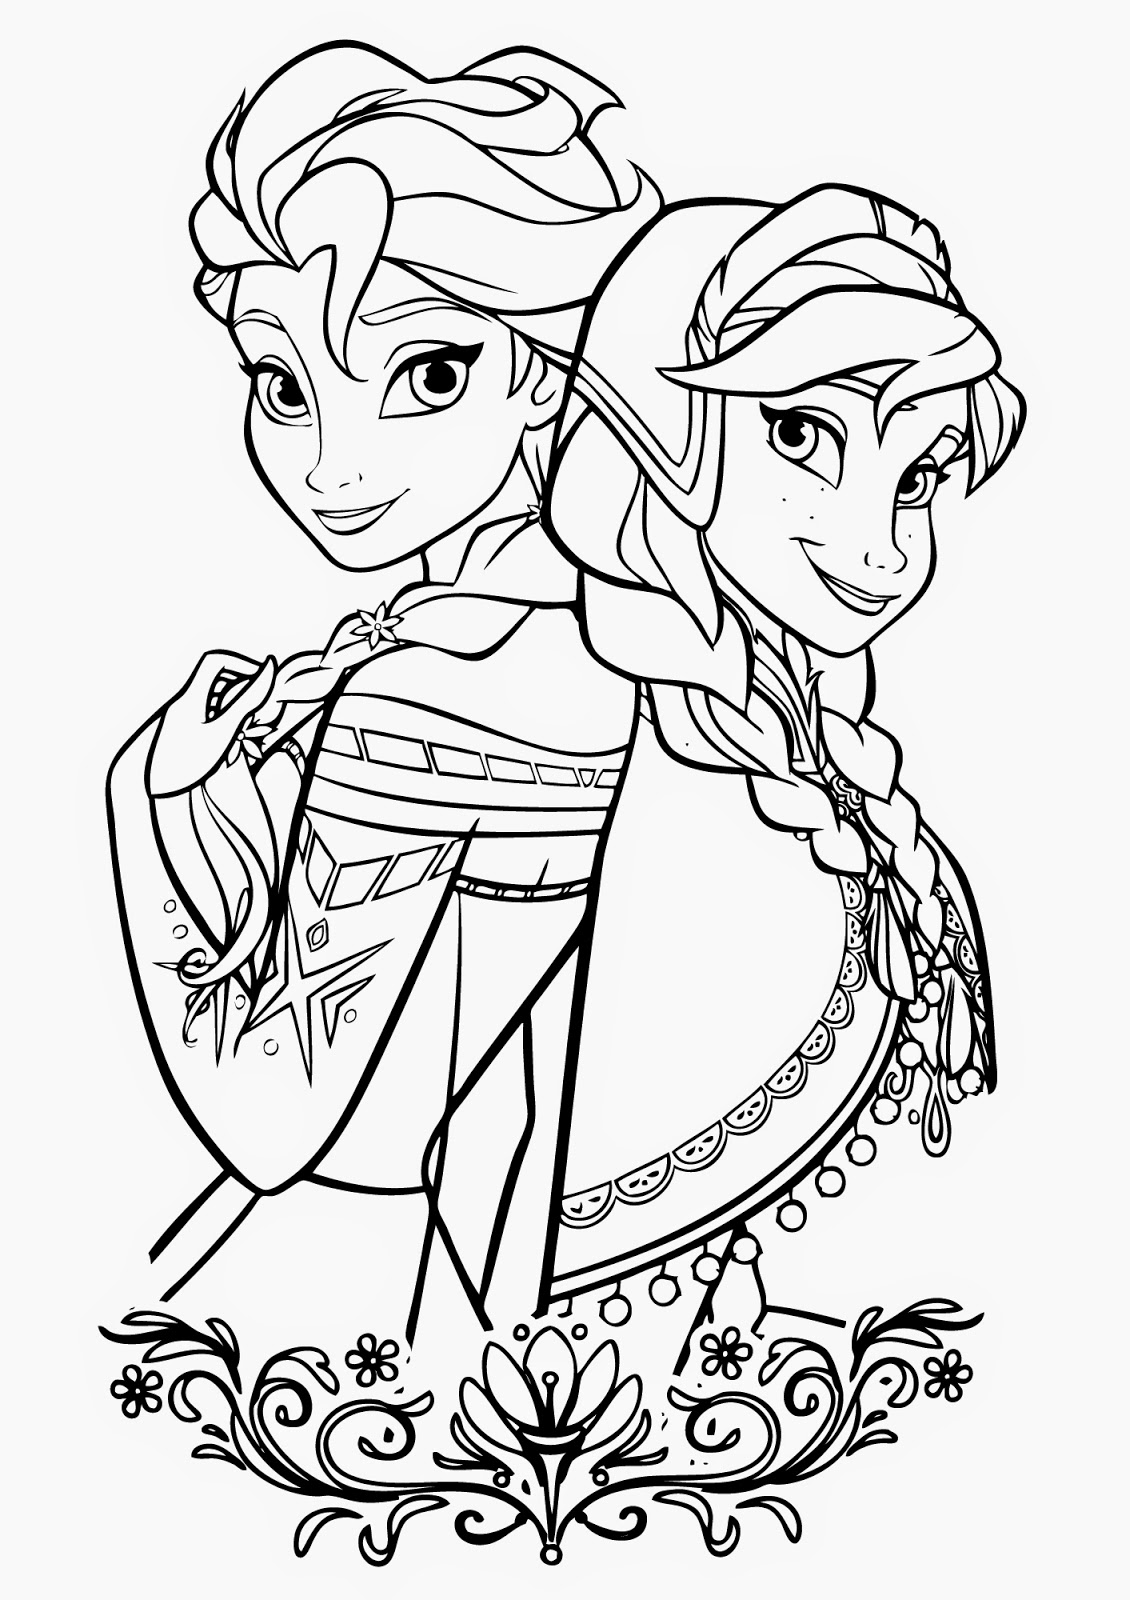 disney frozen colouring sheets coloring page world frozen portrait sheets disney colouring frozen 